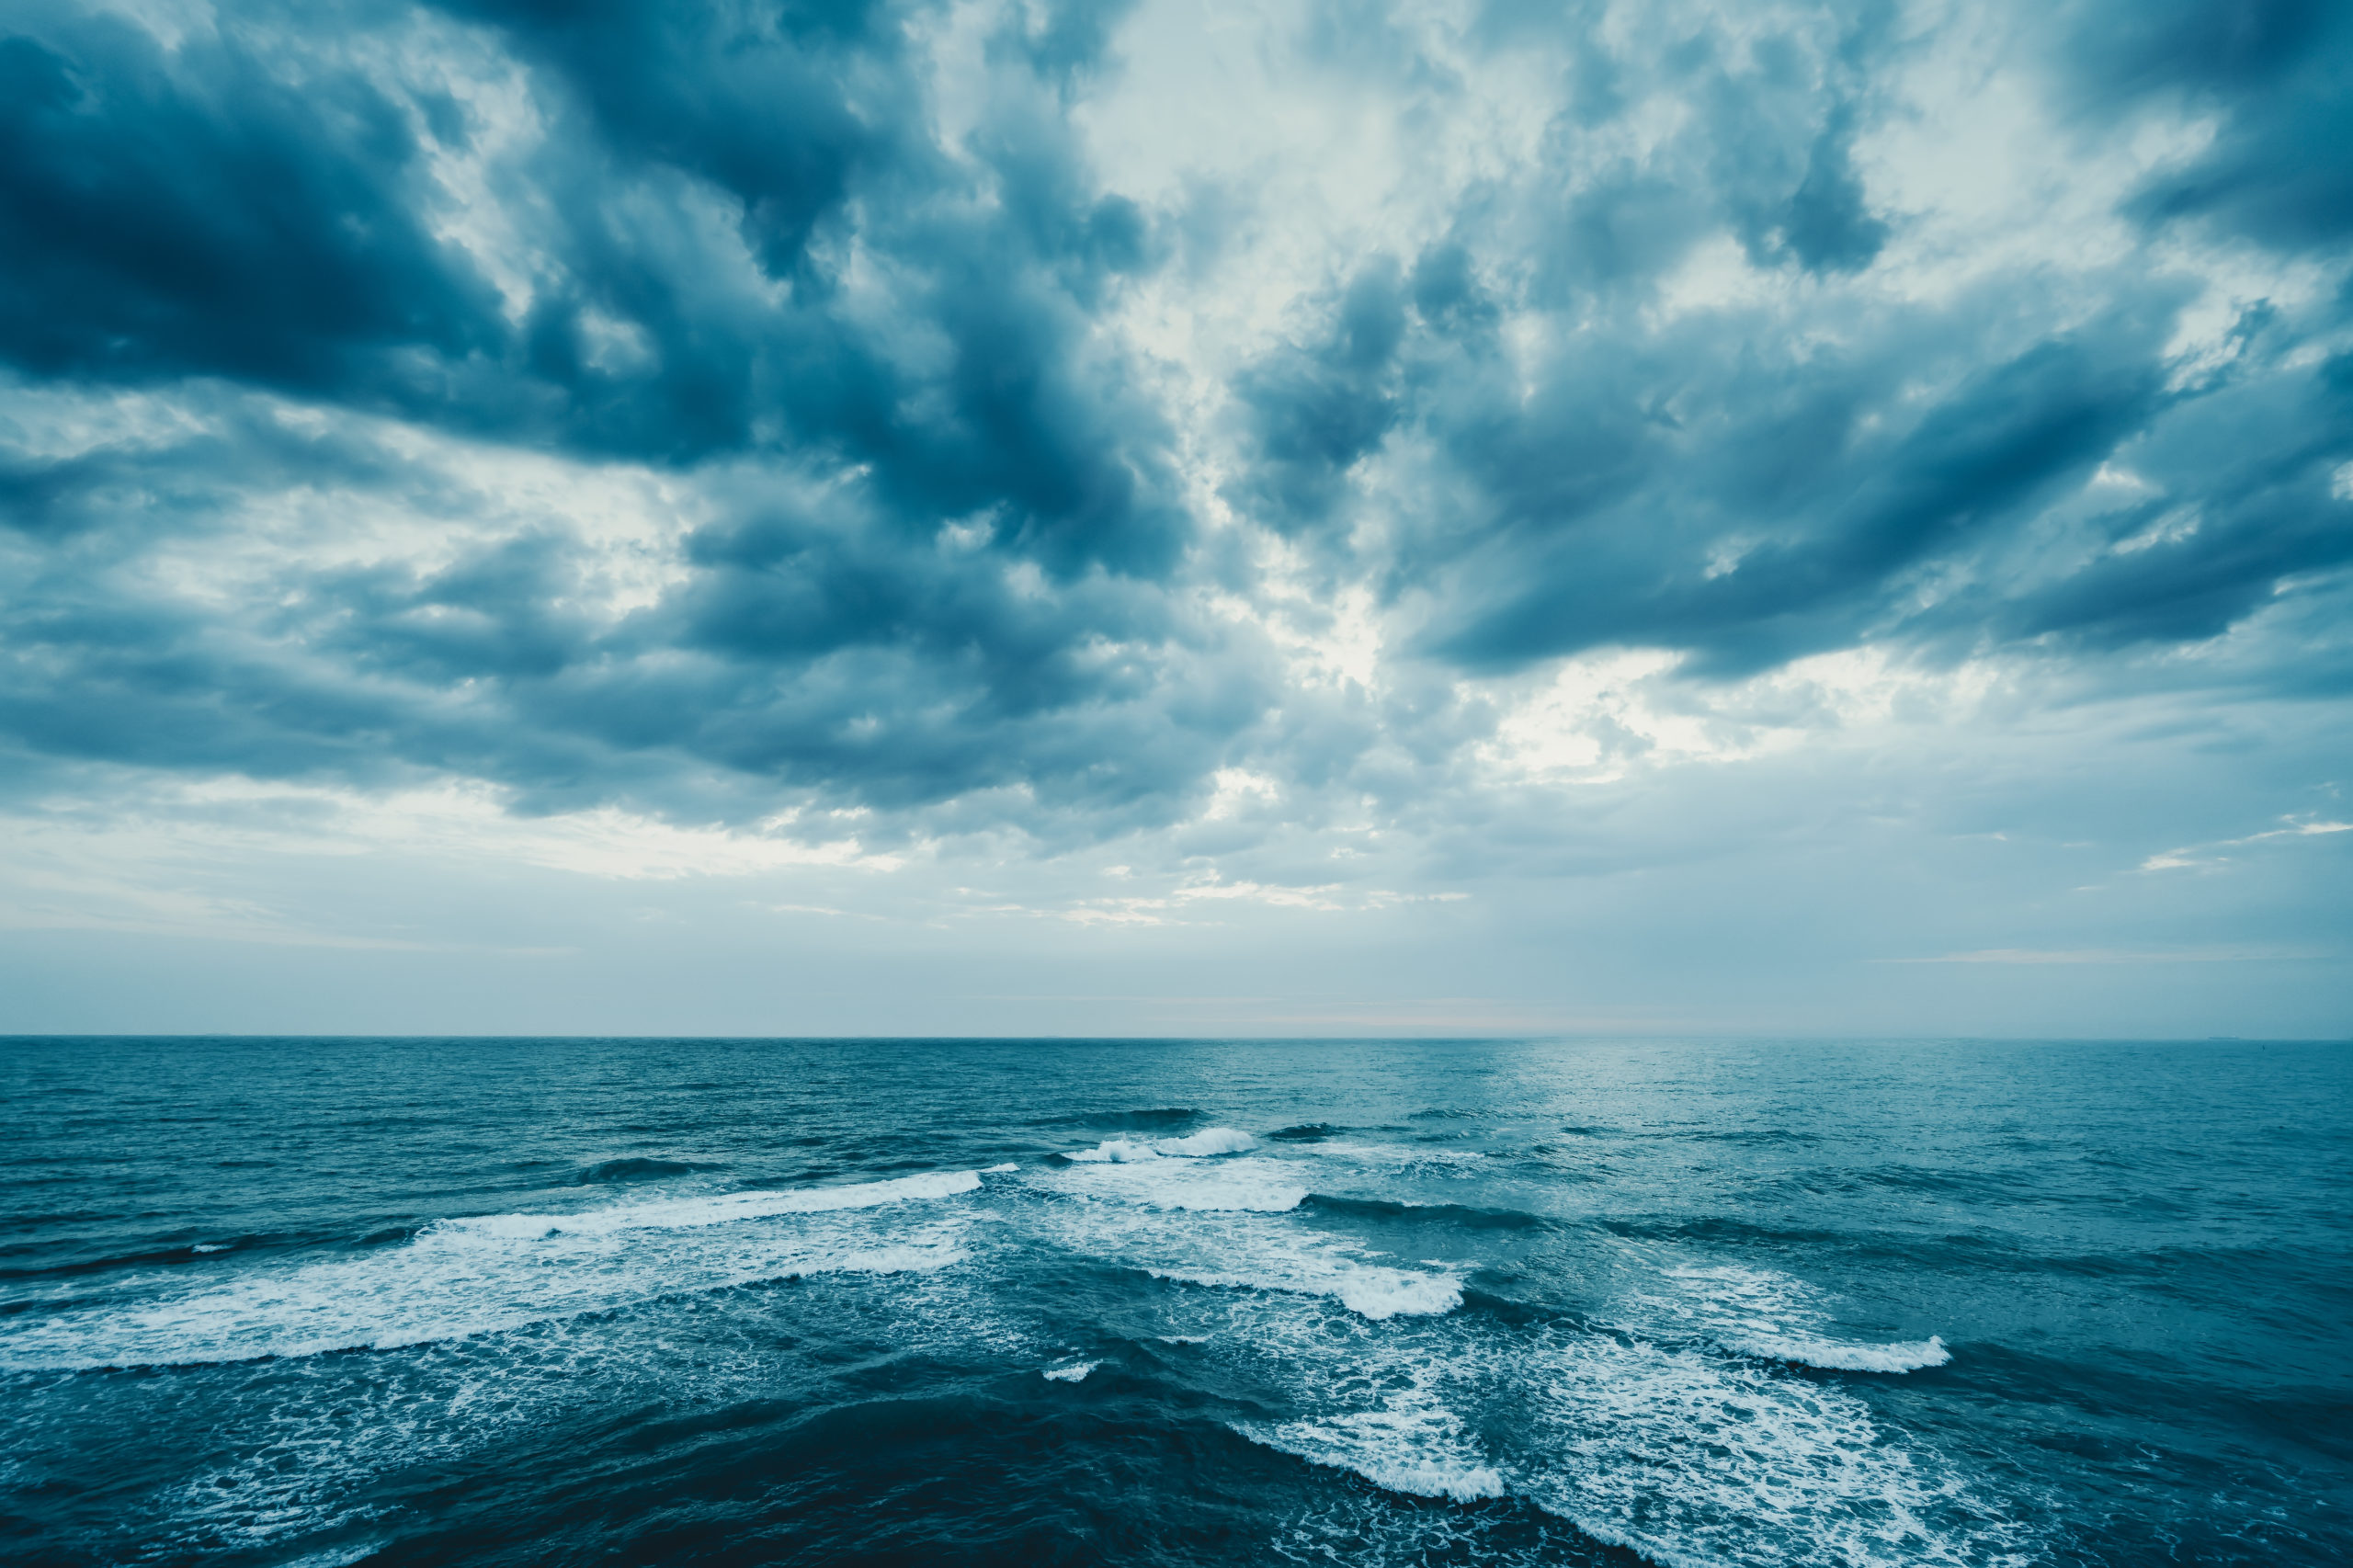 Dark blue clouds and sea with foam waves before a hurricane or tropical storm